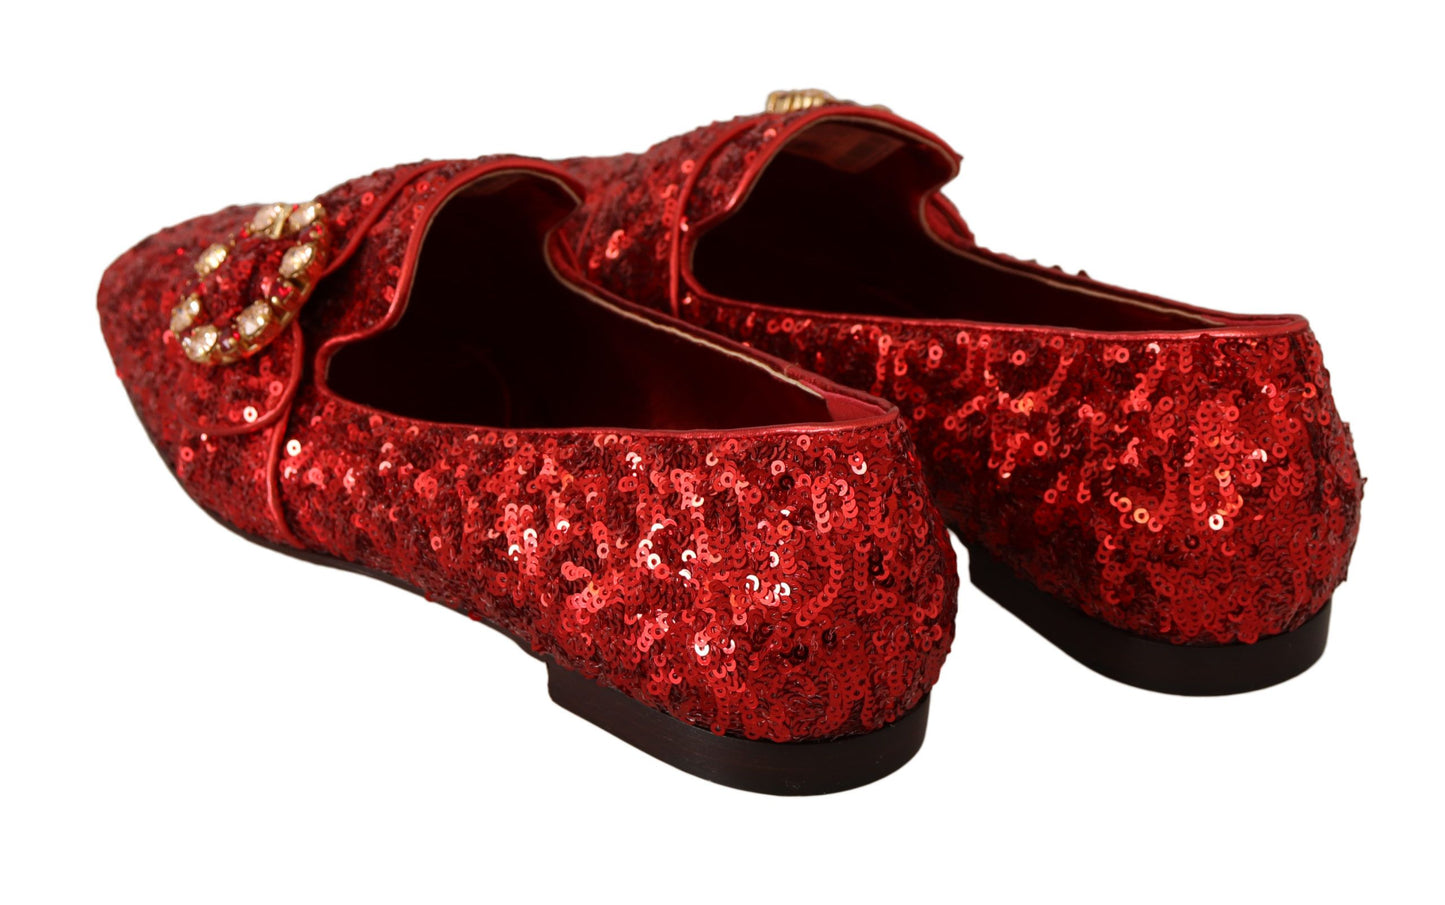 Sequined Red Flat Loafers with Crystal Gems